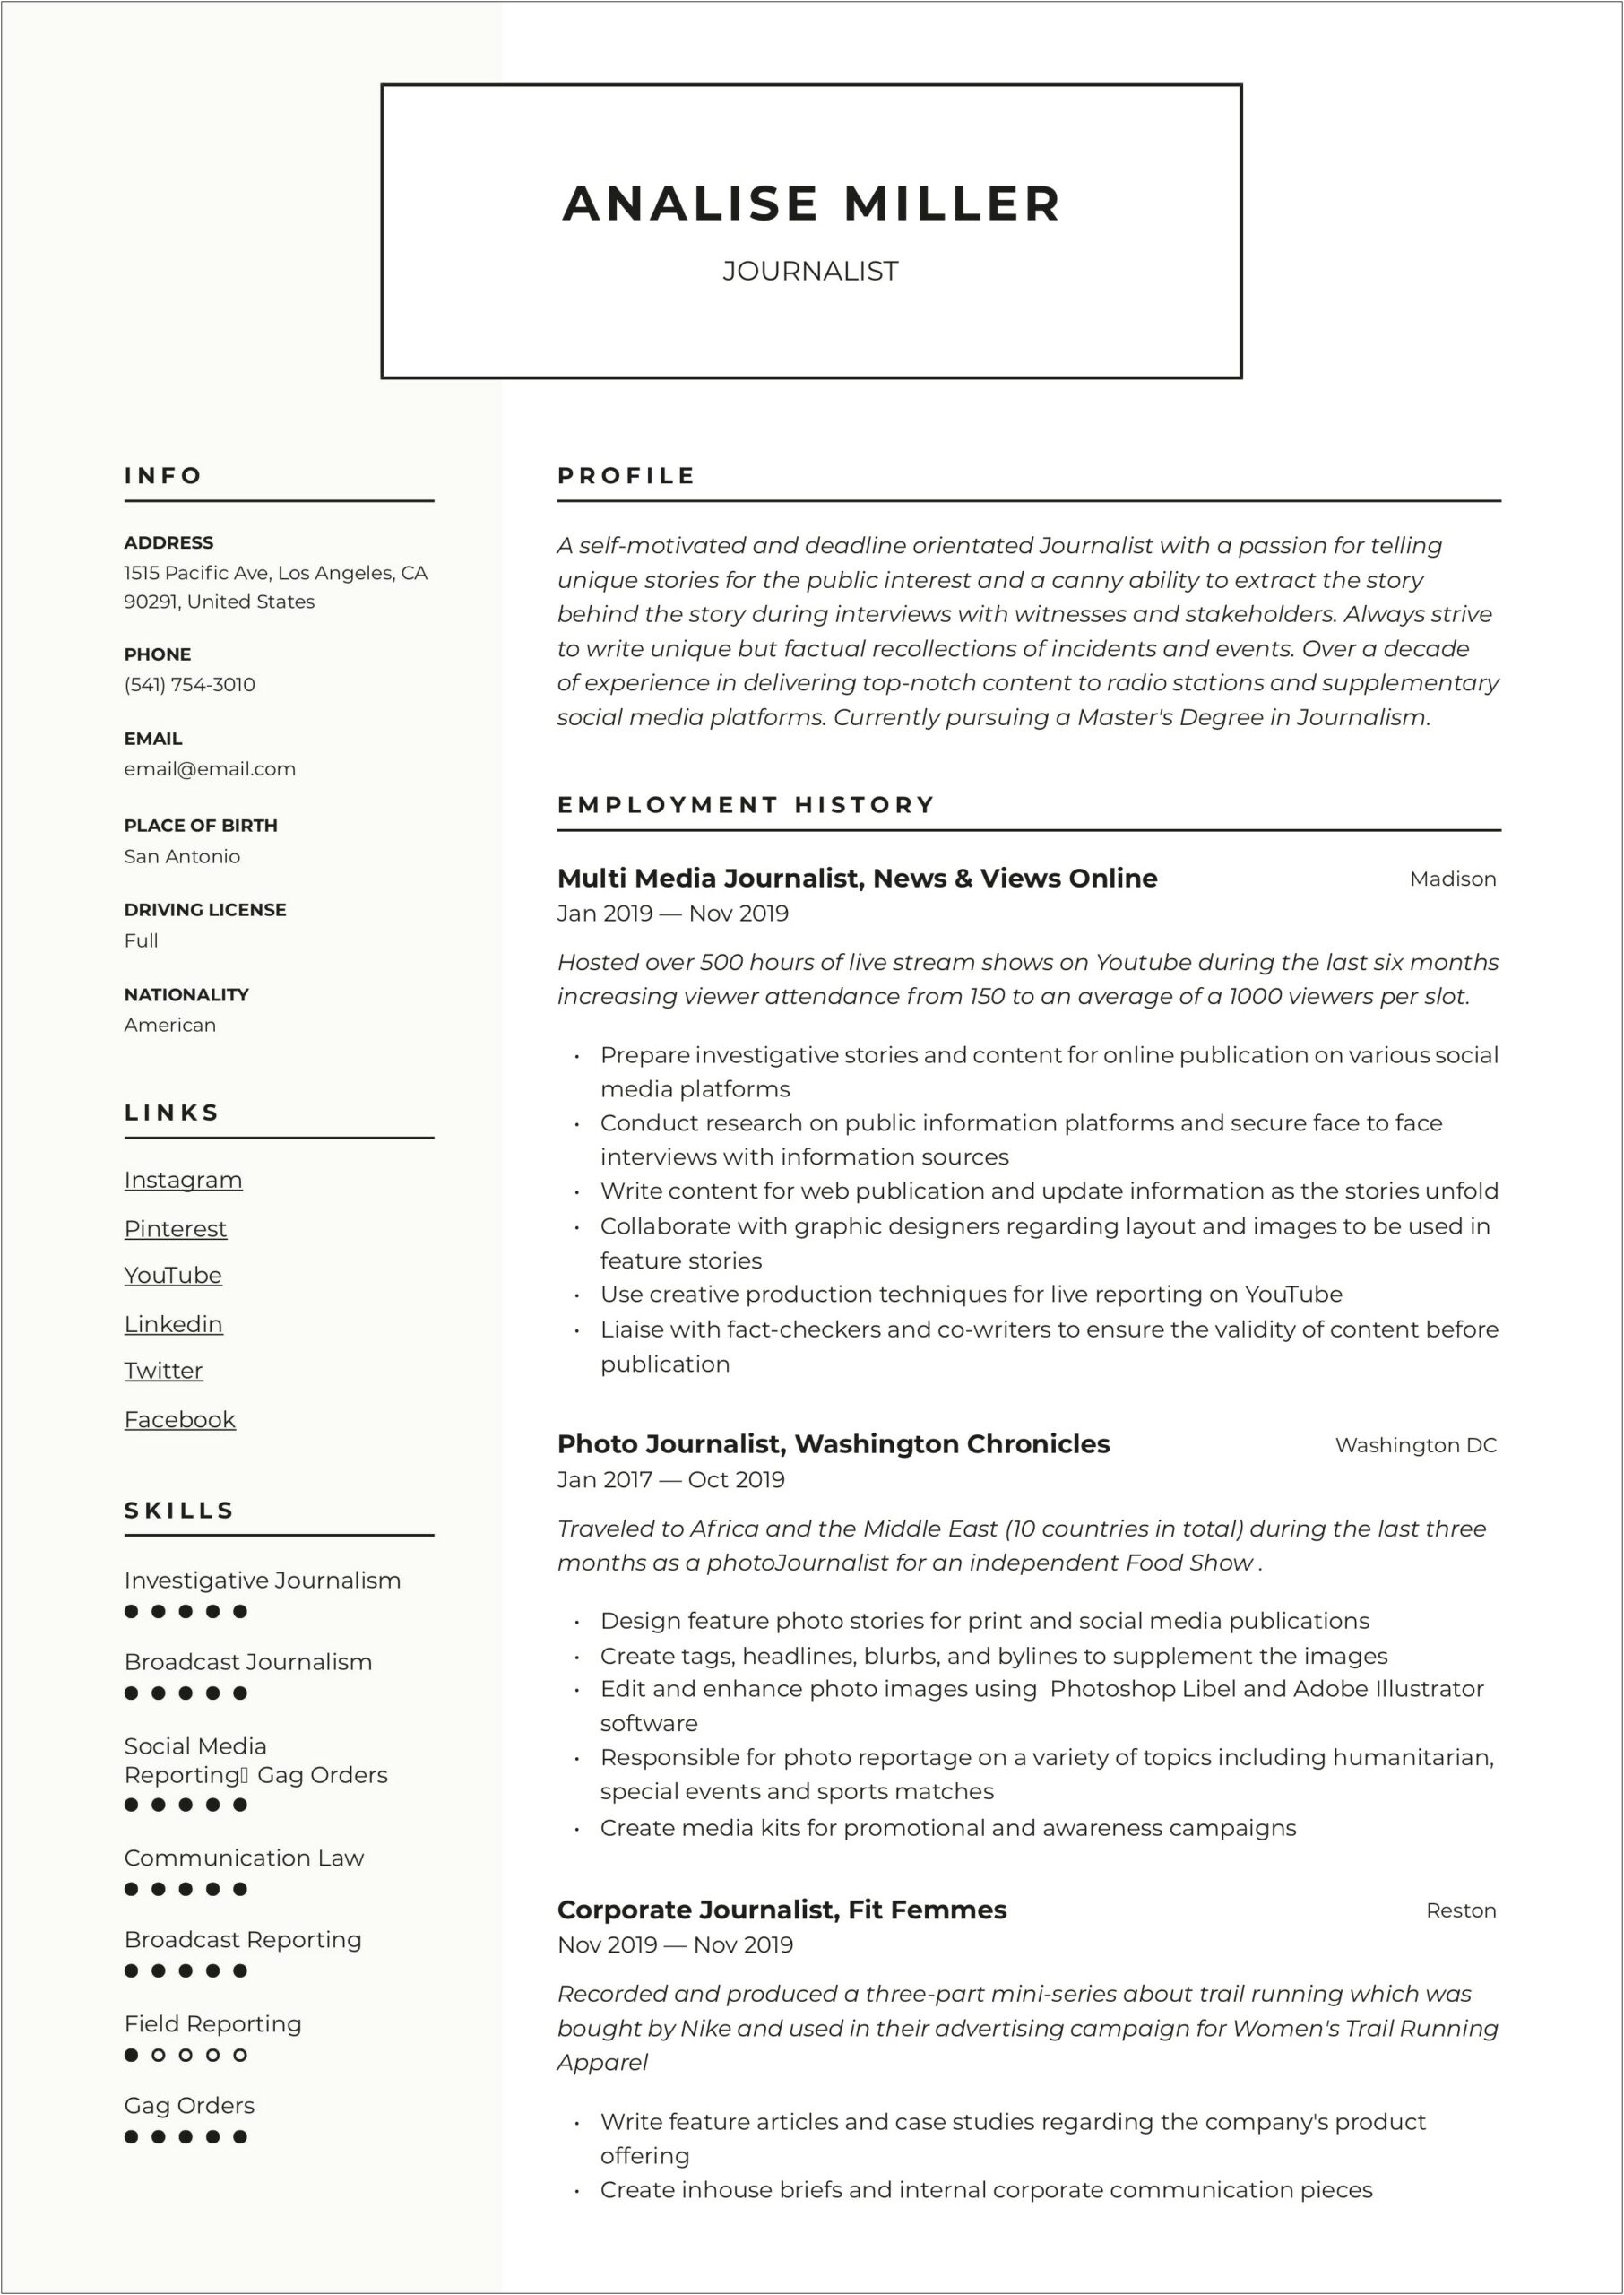 Resume Skills For A Journalist